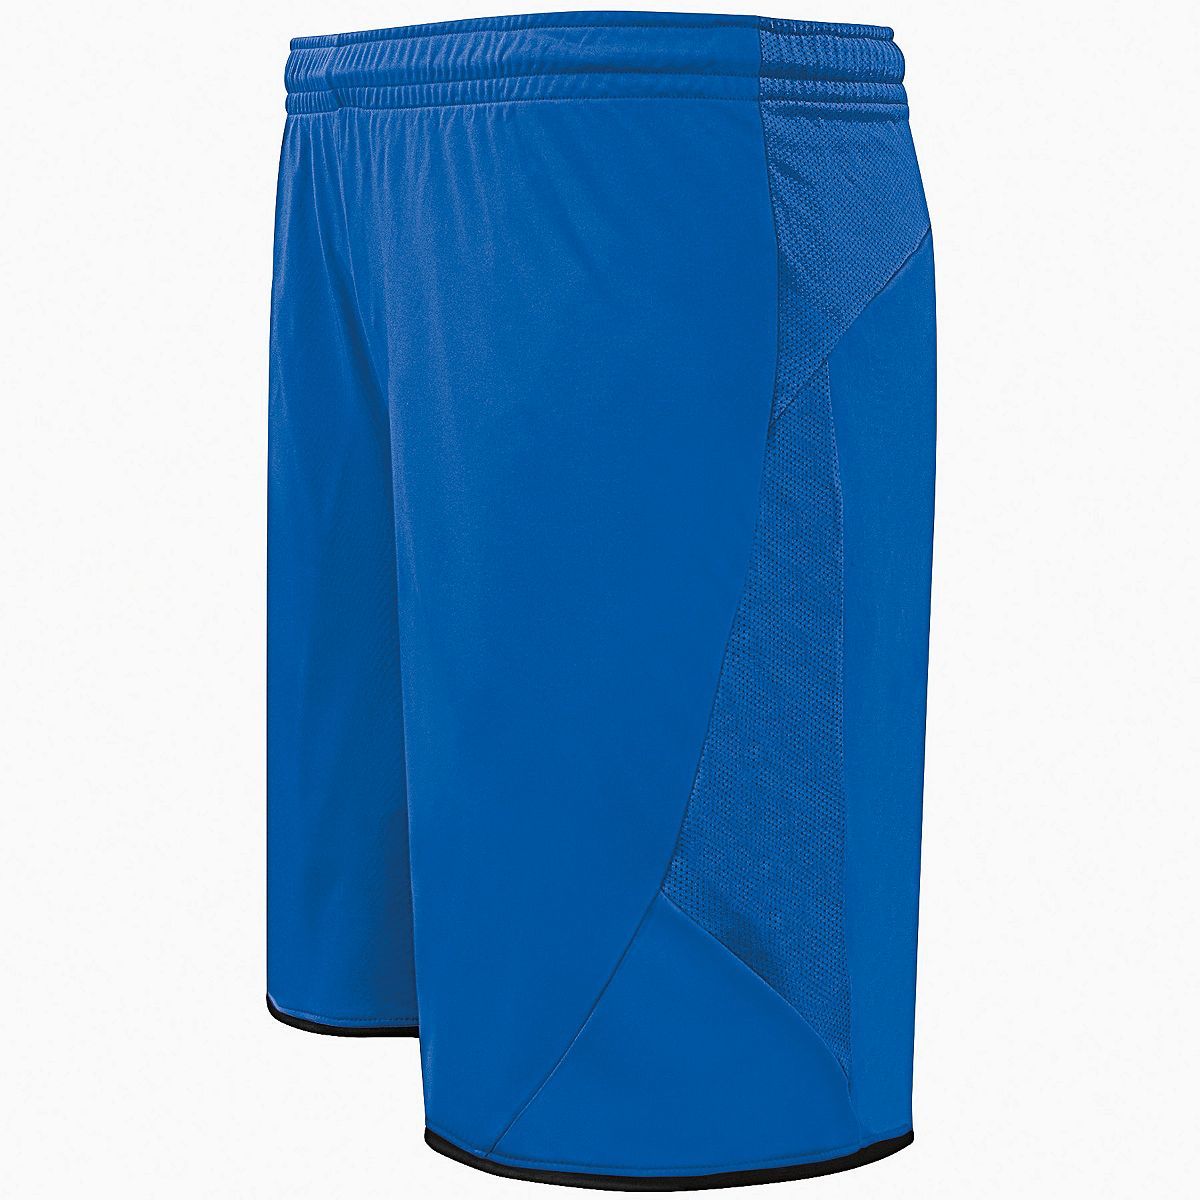 High 5 Youth Club Shorts in Royal/Black  -Part of the Youth, Youth-Shorts, High5-Products, Soccer, All-Sports-1 product lines at KanaleyCreations.com